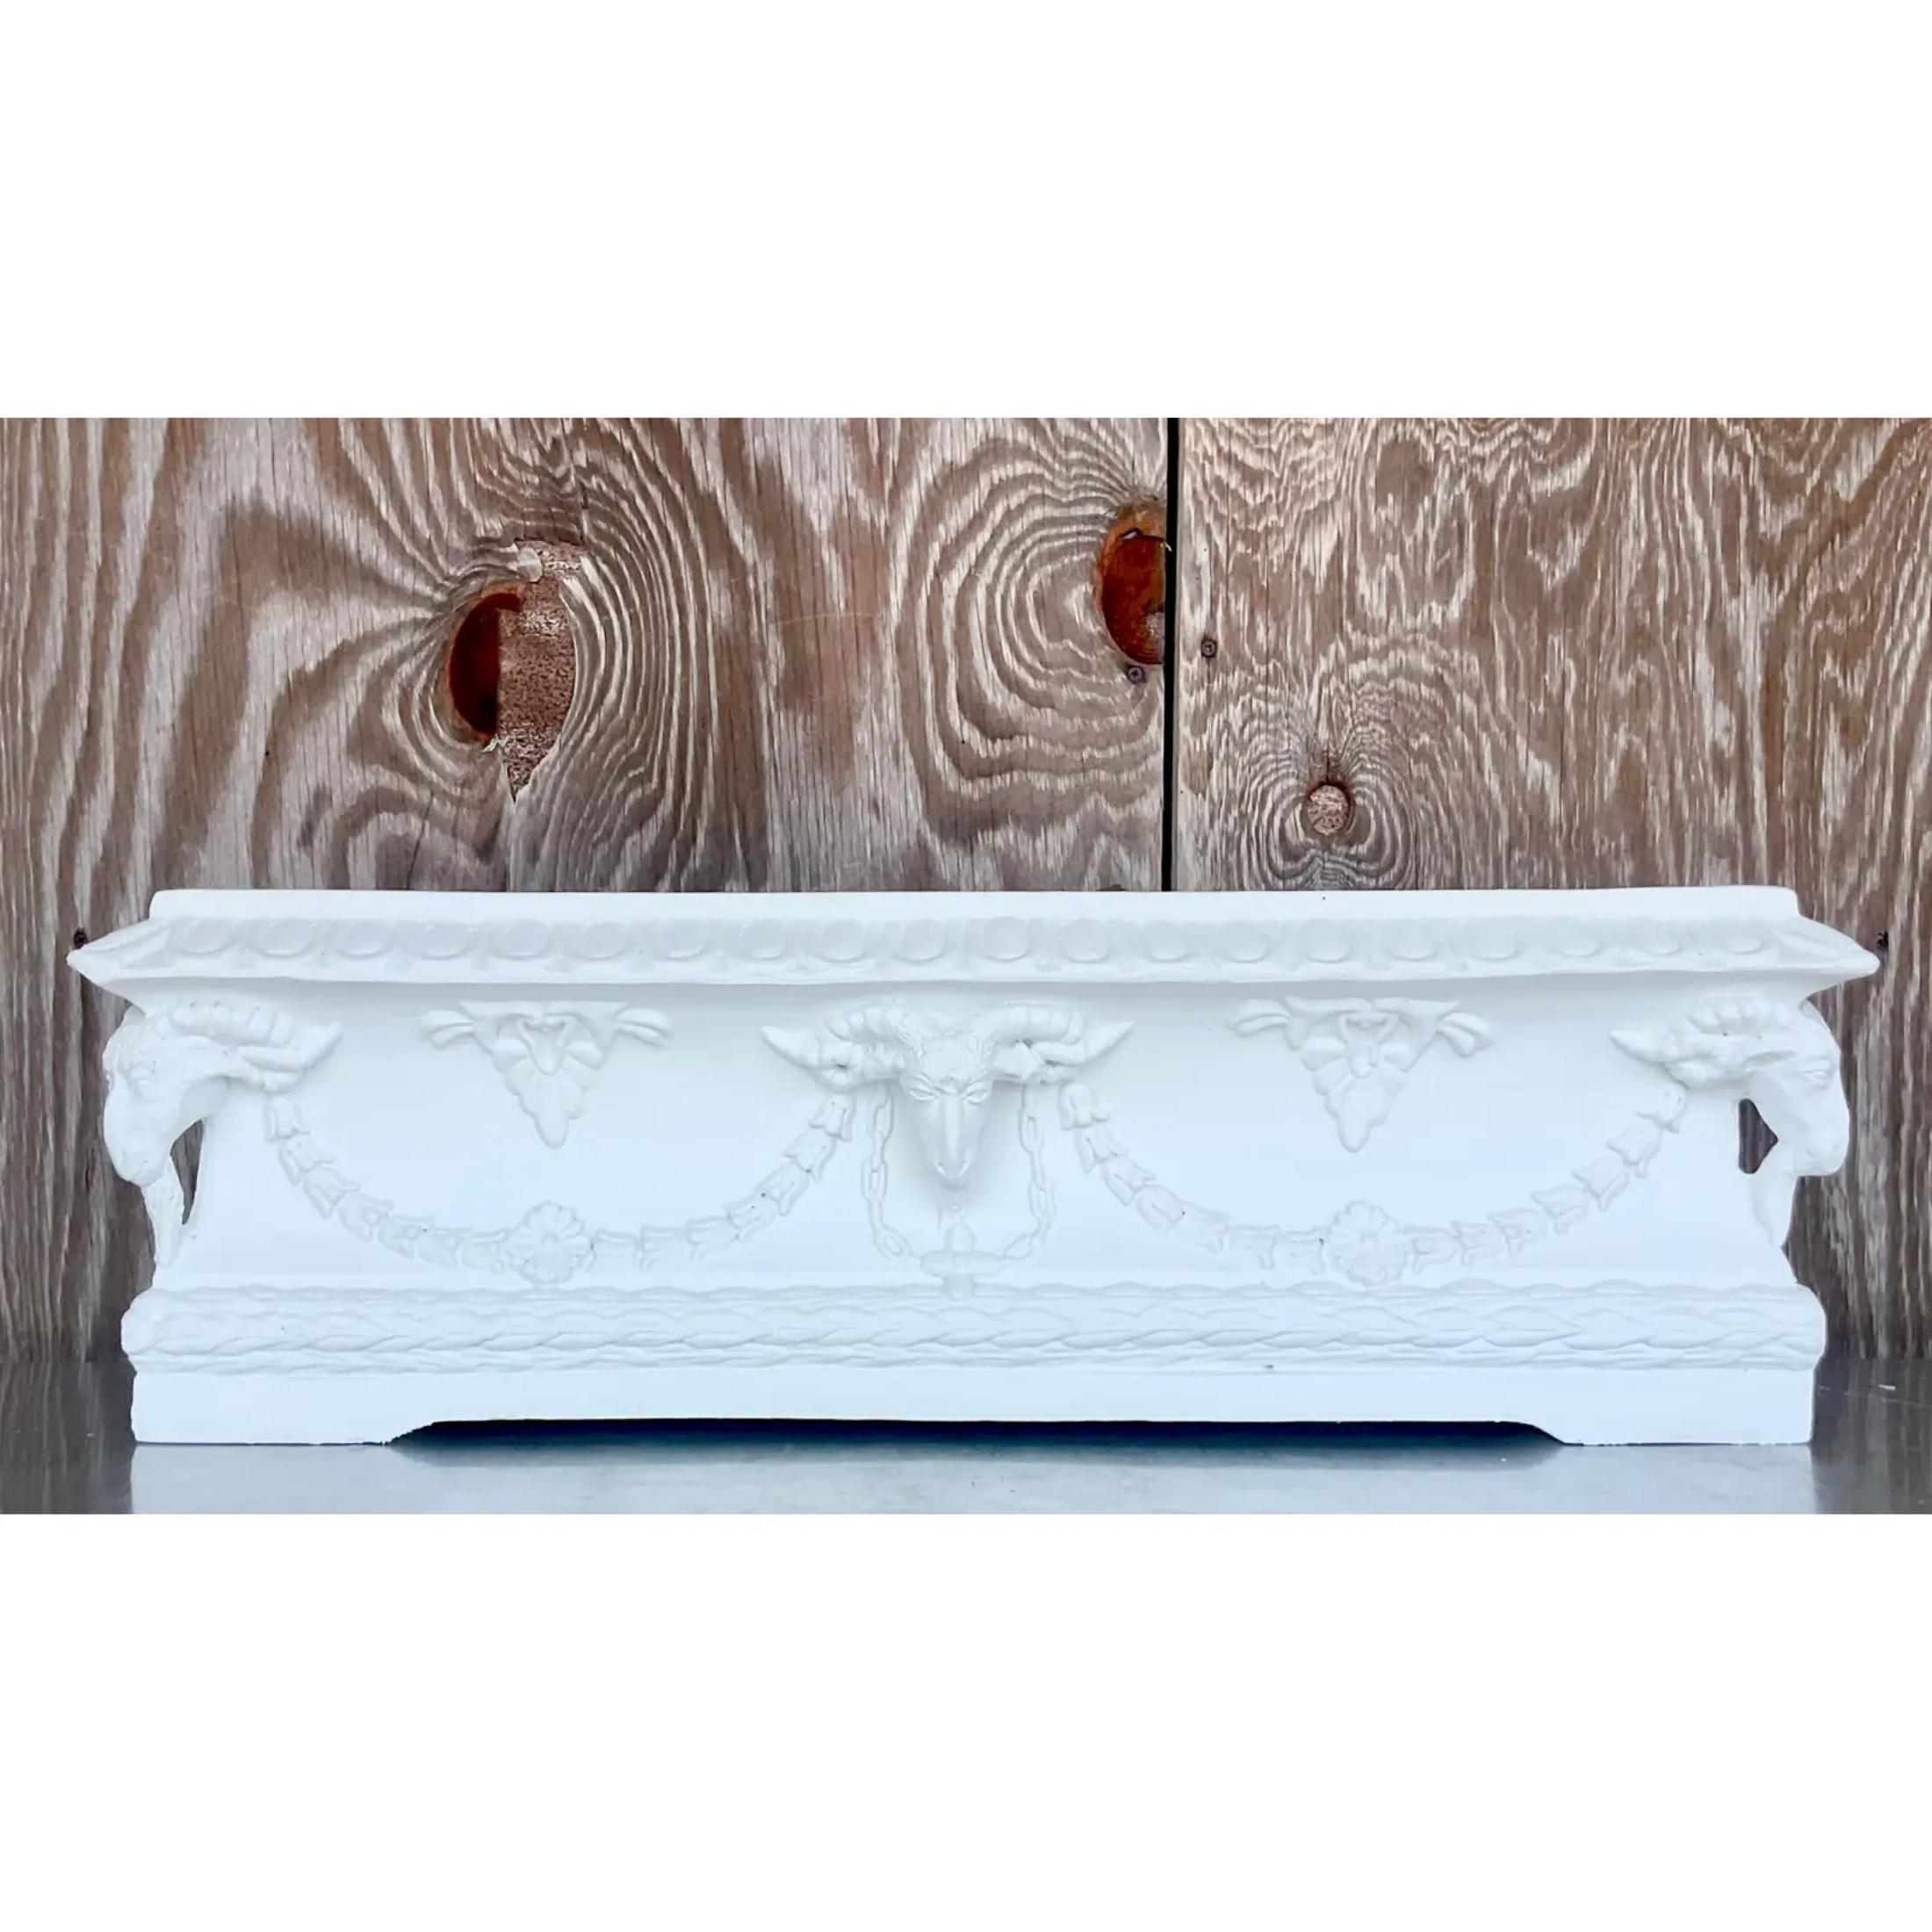 A fabulous vintage Boho planter box. A chic molded fiberglass in a matte plaster white finish. Perfect as is or paint to suit your project. Two boxes available on my Chairish page. Acquired from a Hobe Sound estate